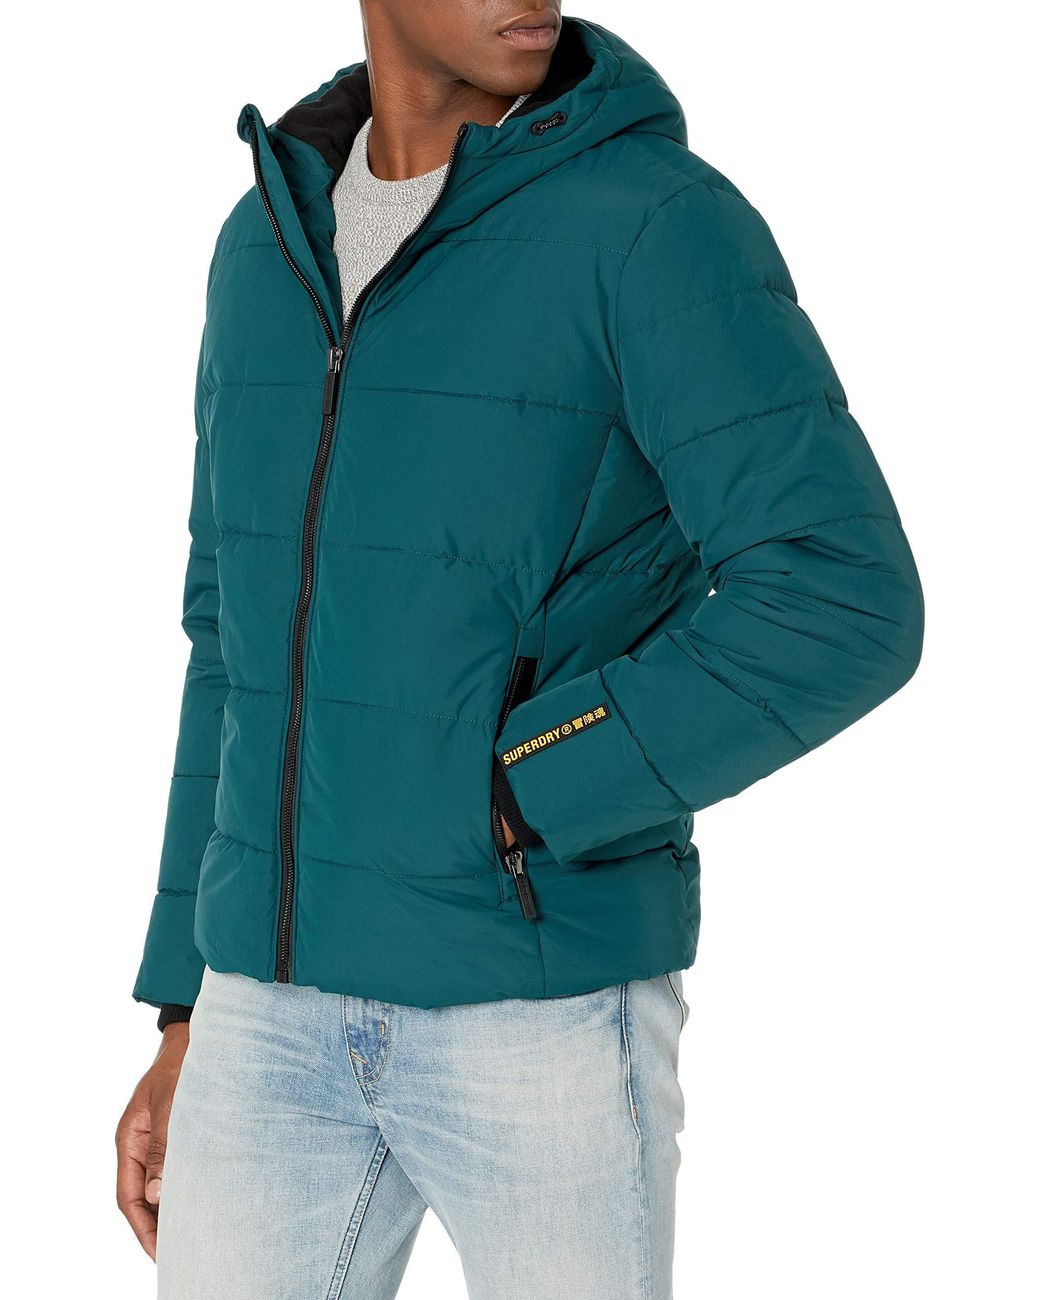 Superdry Synthetic Sports Puffer Jacket in Green for Men - Lyst